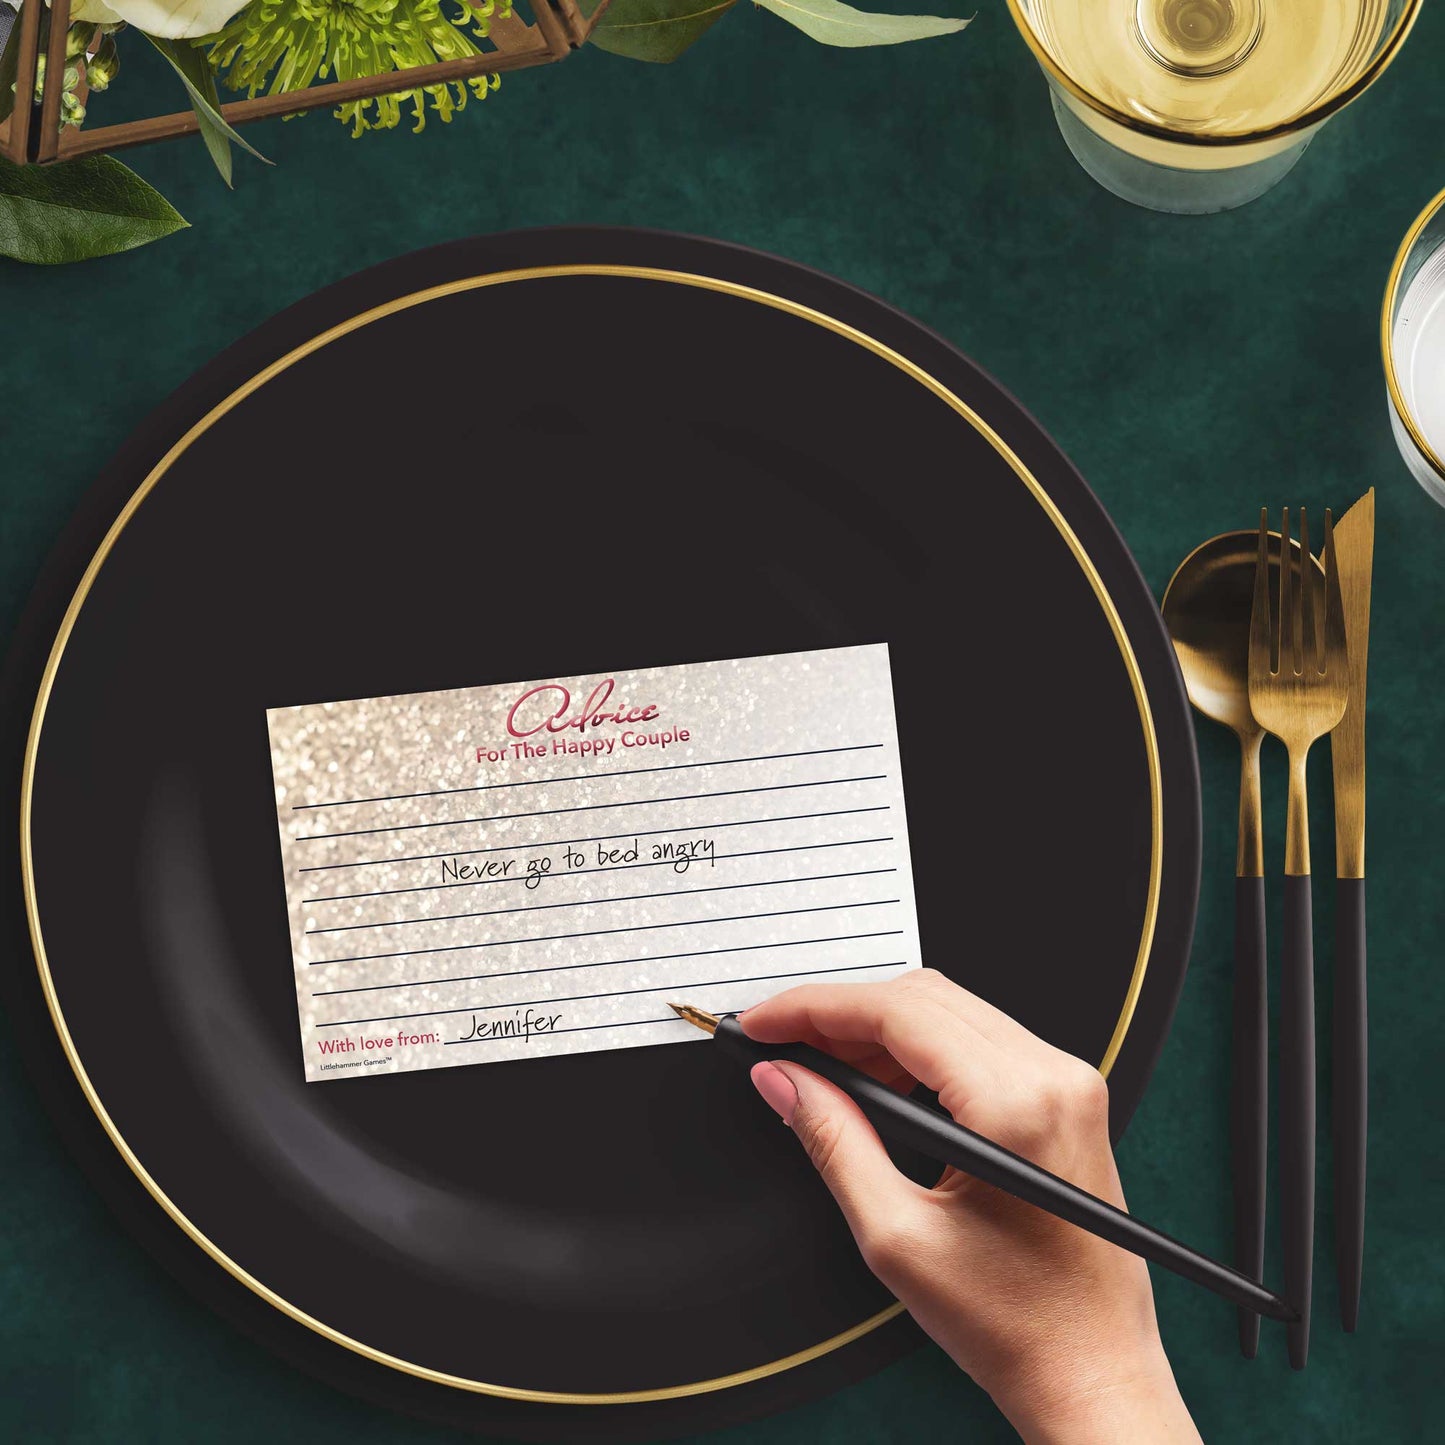 Woman with a pen sitting at a dark place setting with a black and gold plate filling out a glittery rose gold Advice for the Happy Couple card